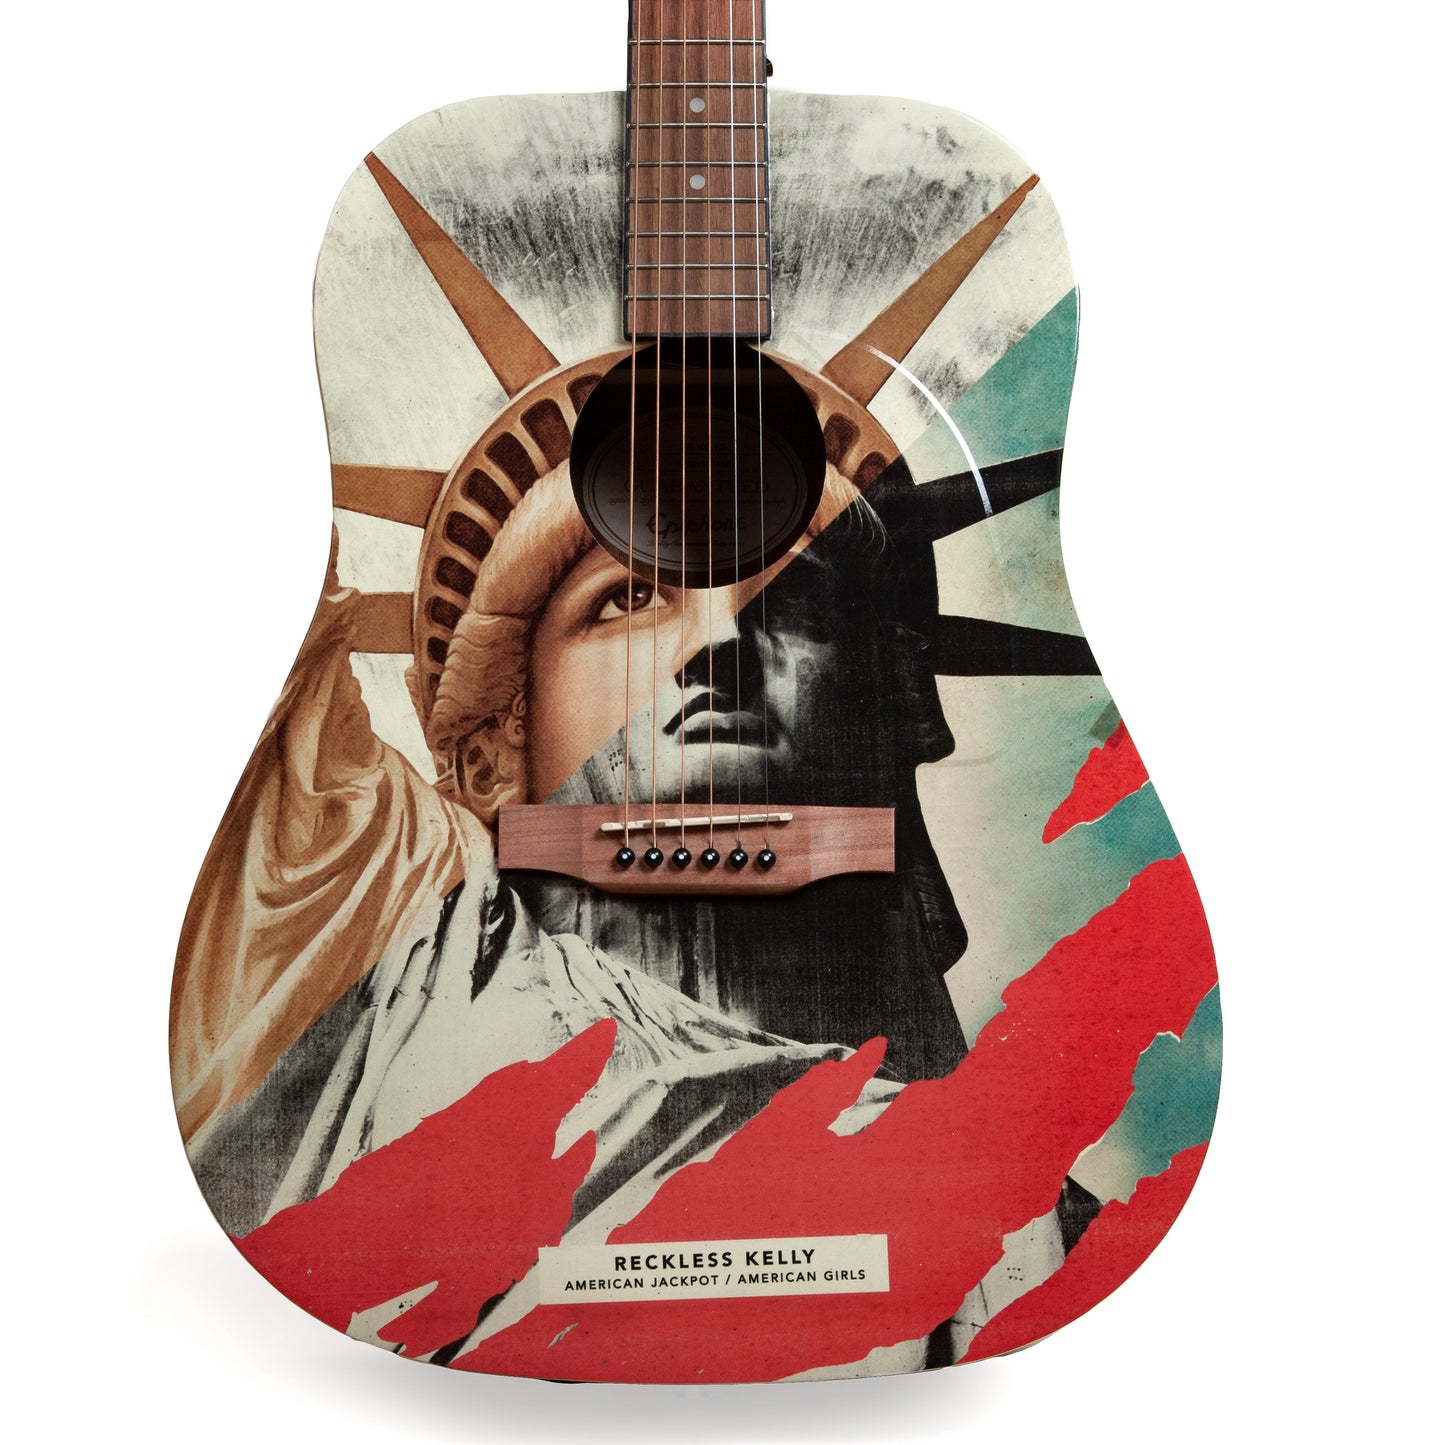 American Jackpot / American Girls Guitar - Autographed by Reckless Kelly